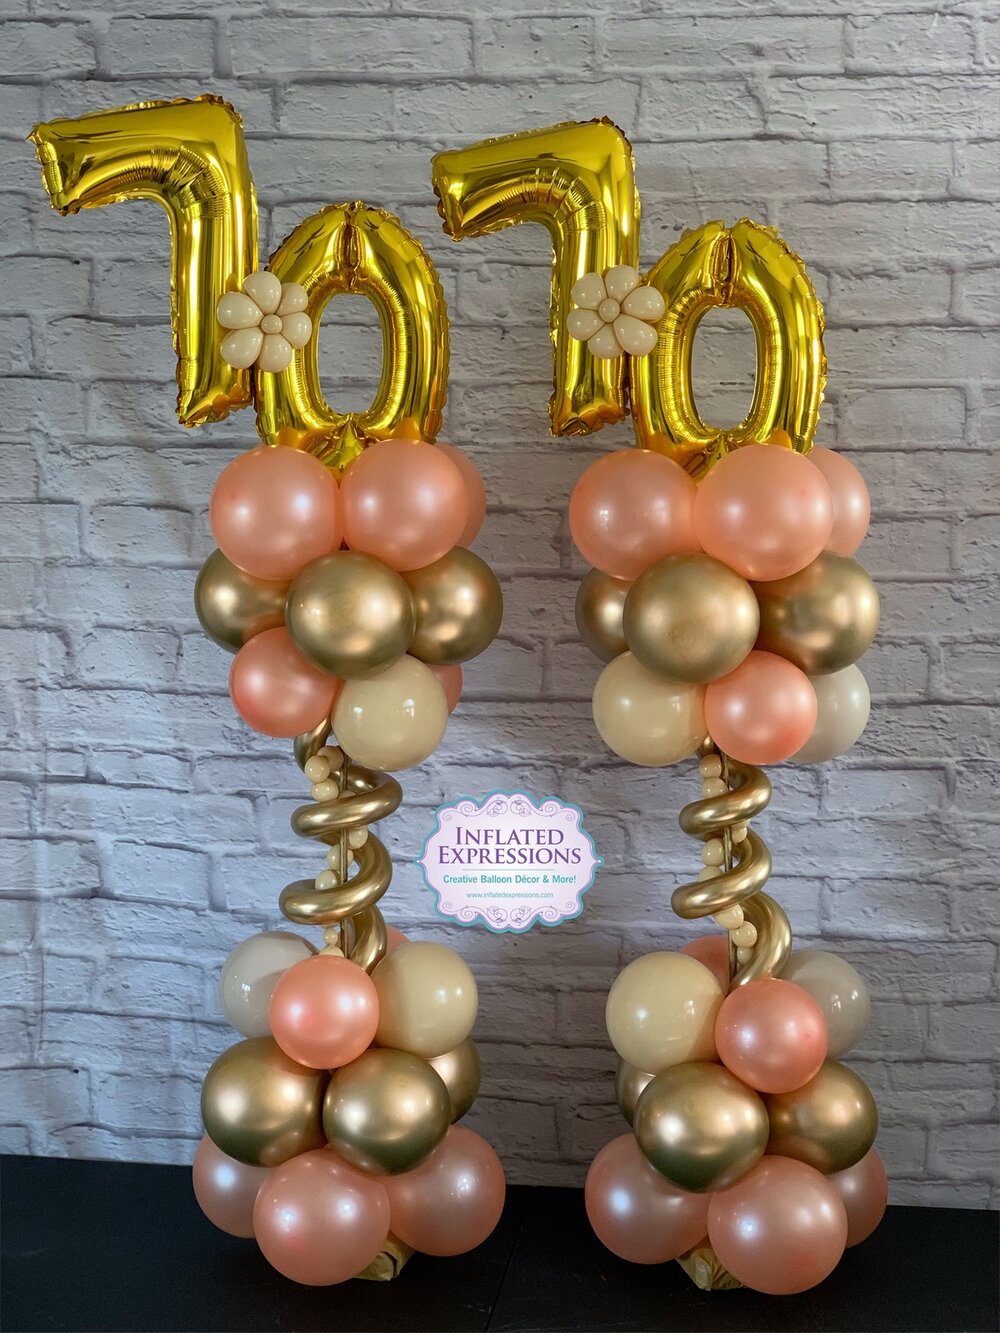 Standard Balloon Column — Inflated Expressions, LLC